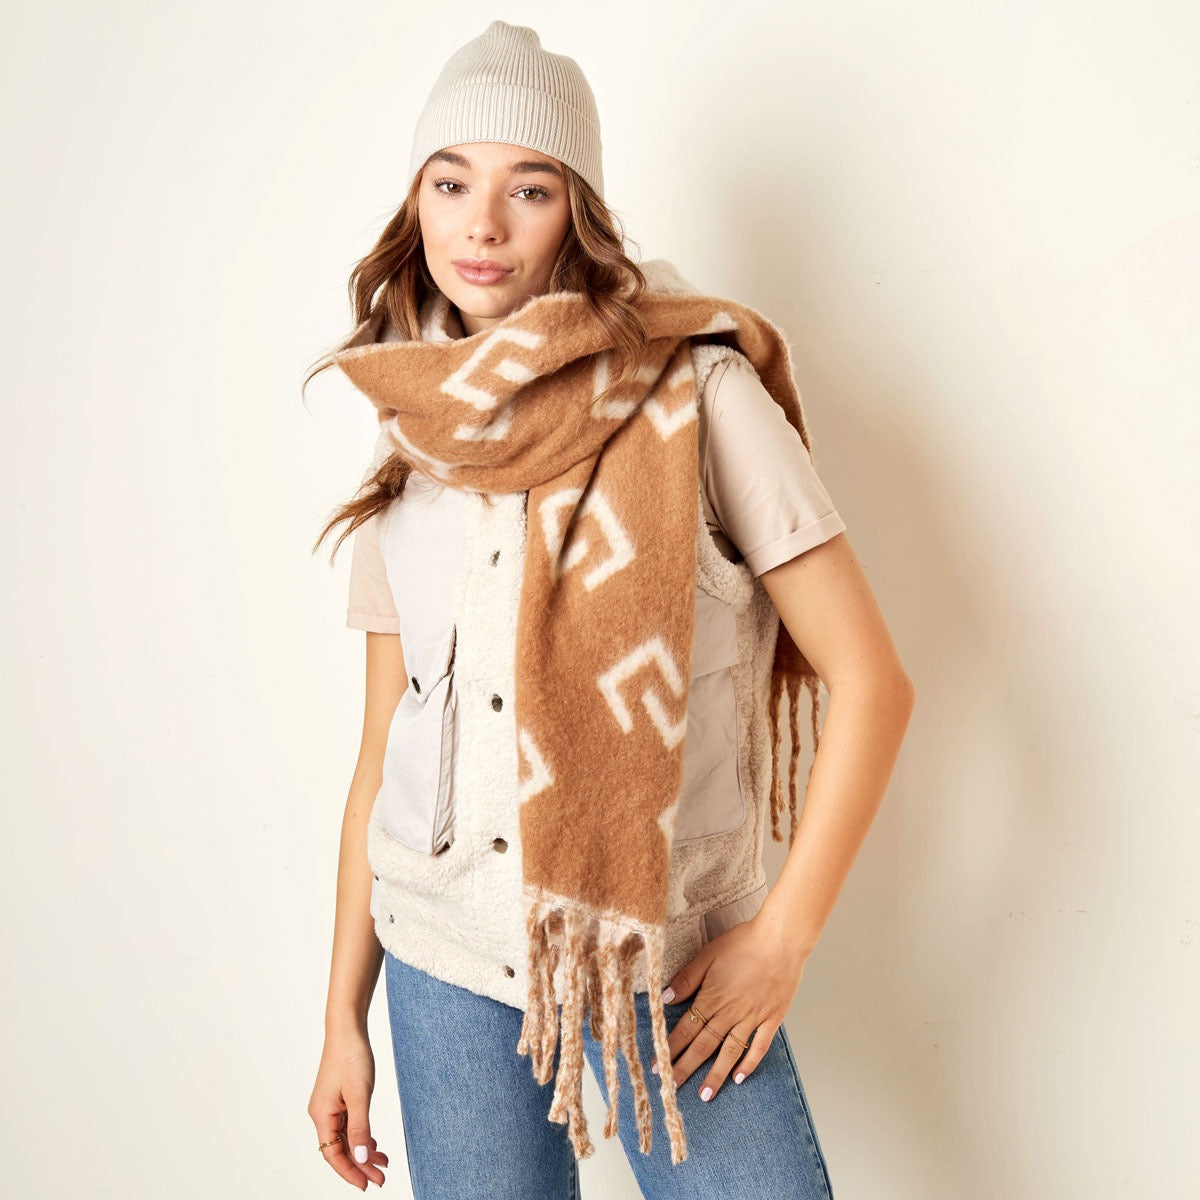 Winter scarf abstract square shapes